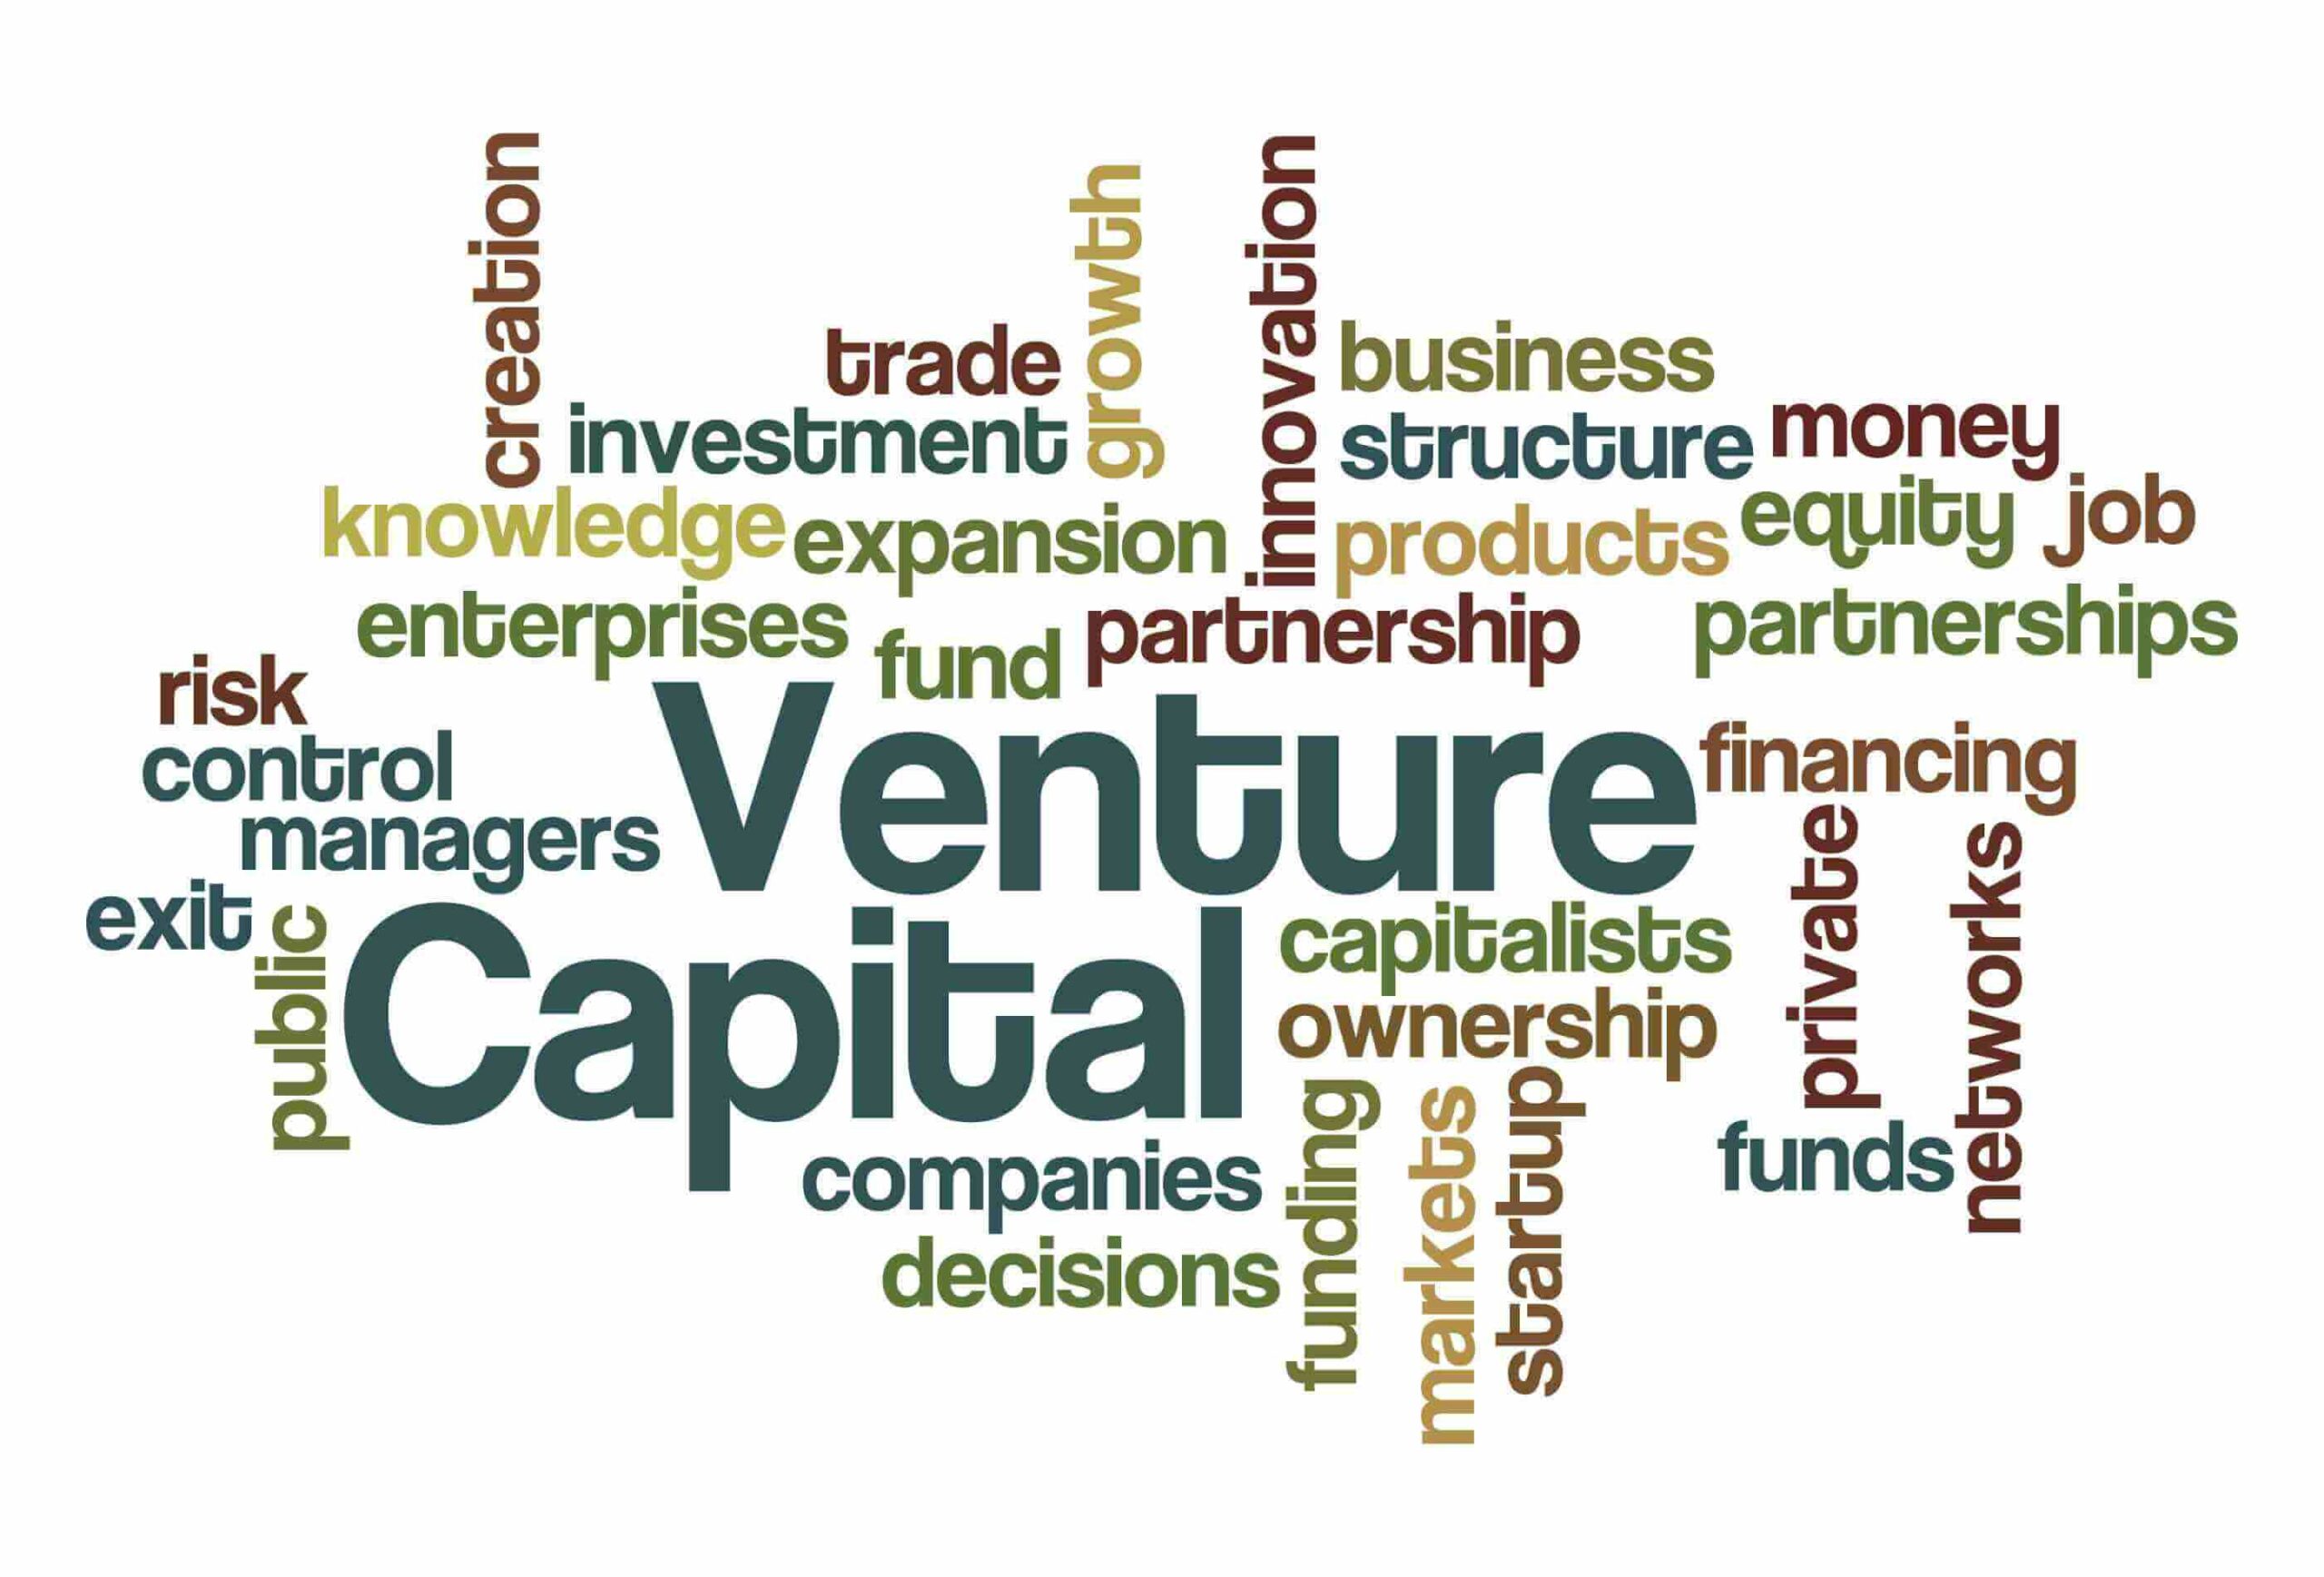 What Is Venture Capital?